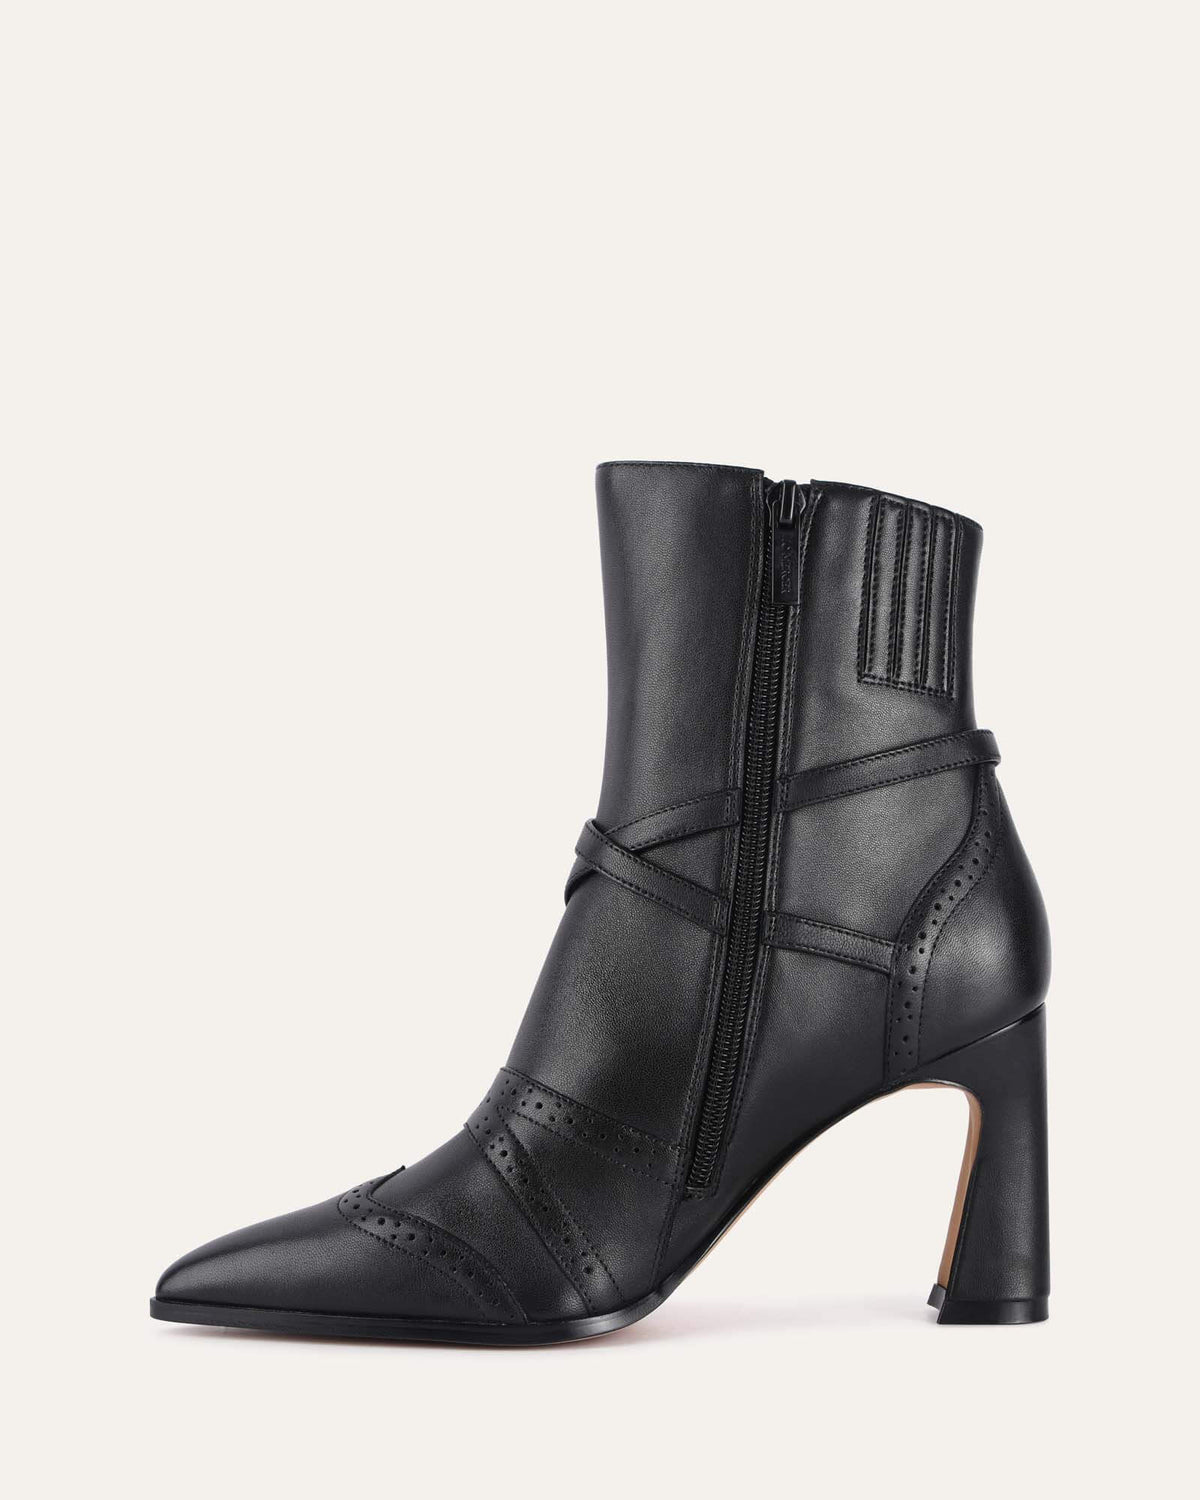 VIENNA HIGH ANKLE BOOTS BLACK LEATHER